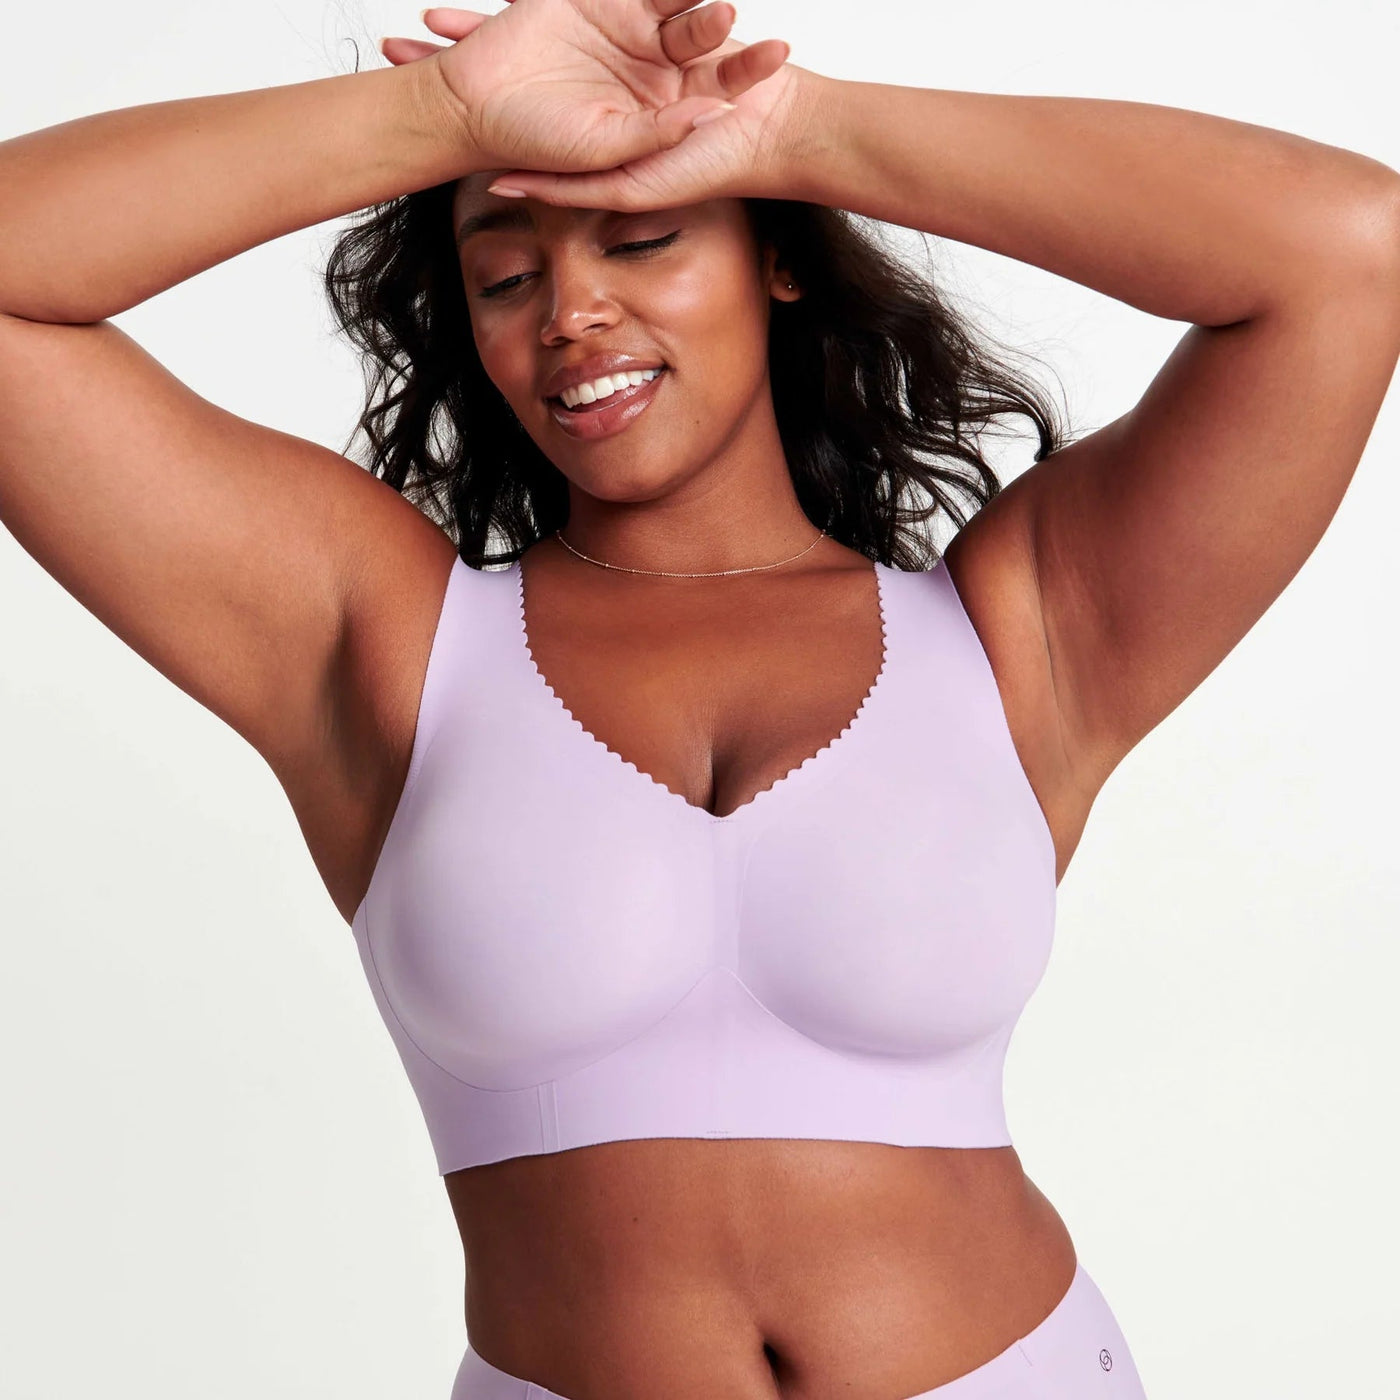 Products – The Only Bra